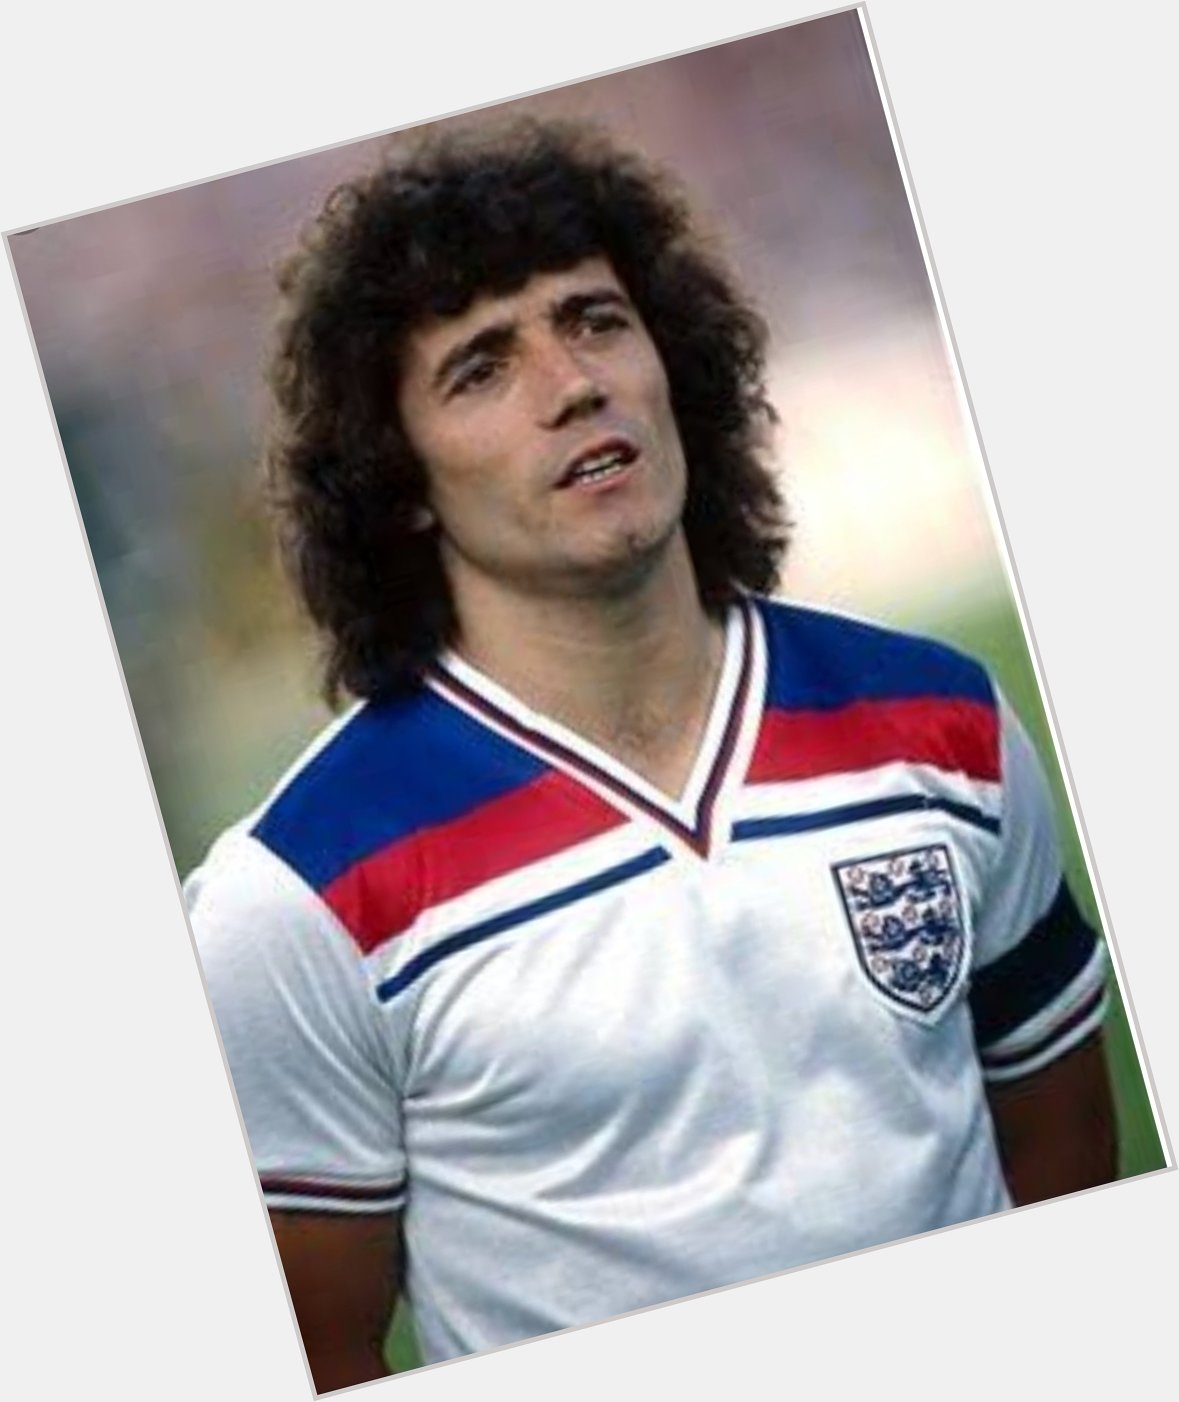 Happy birthday Kevin Keegan, and we should really bring back both the kit and the hair to modern football 